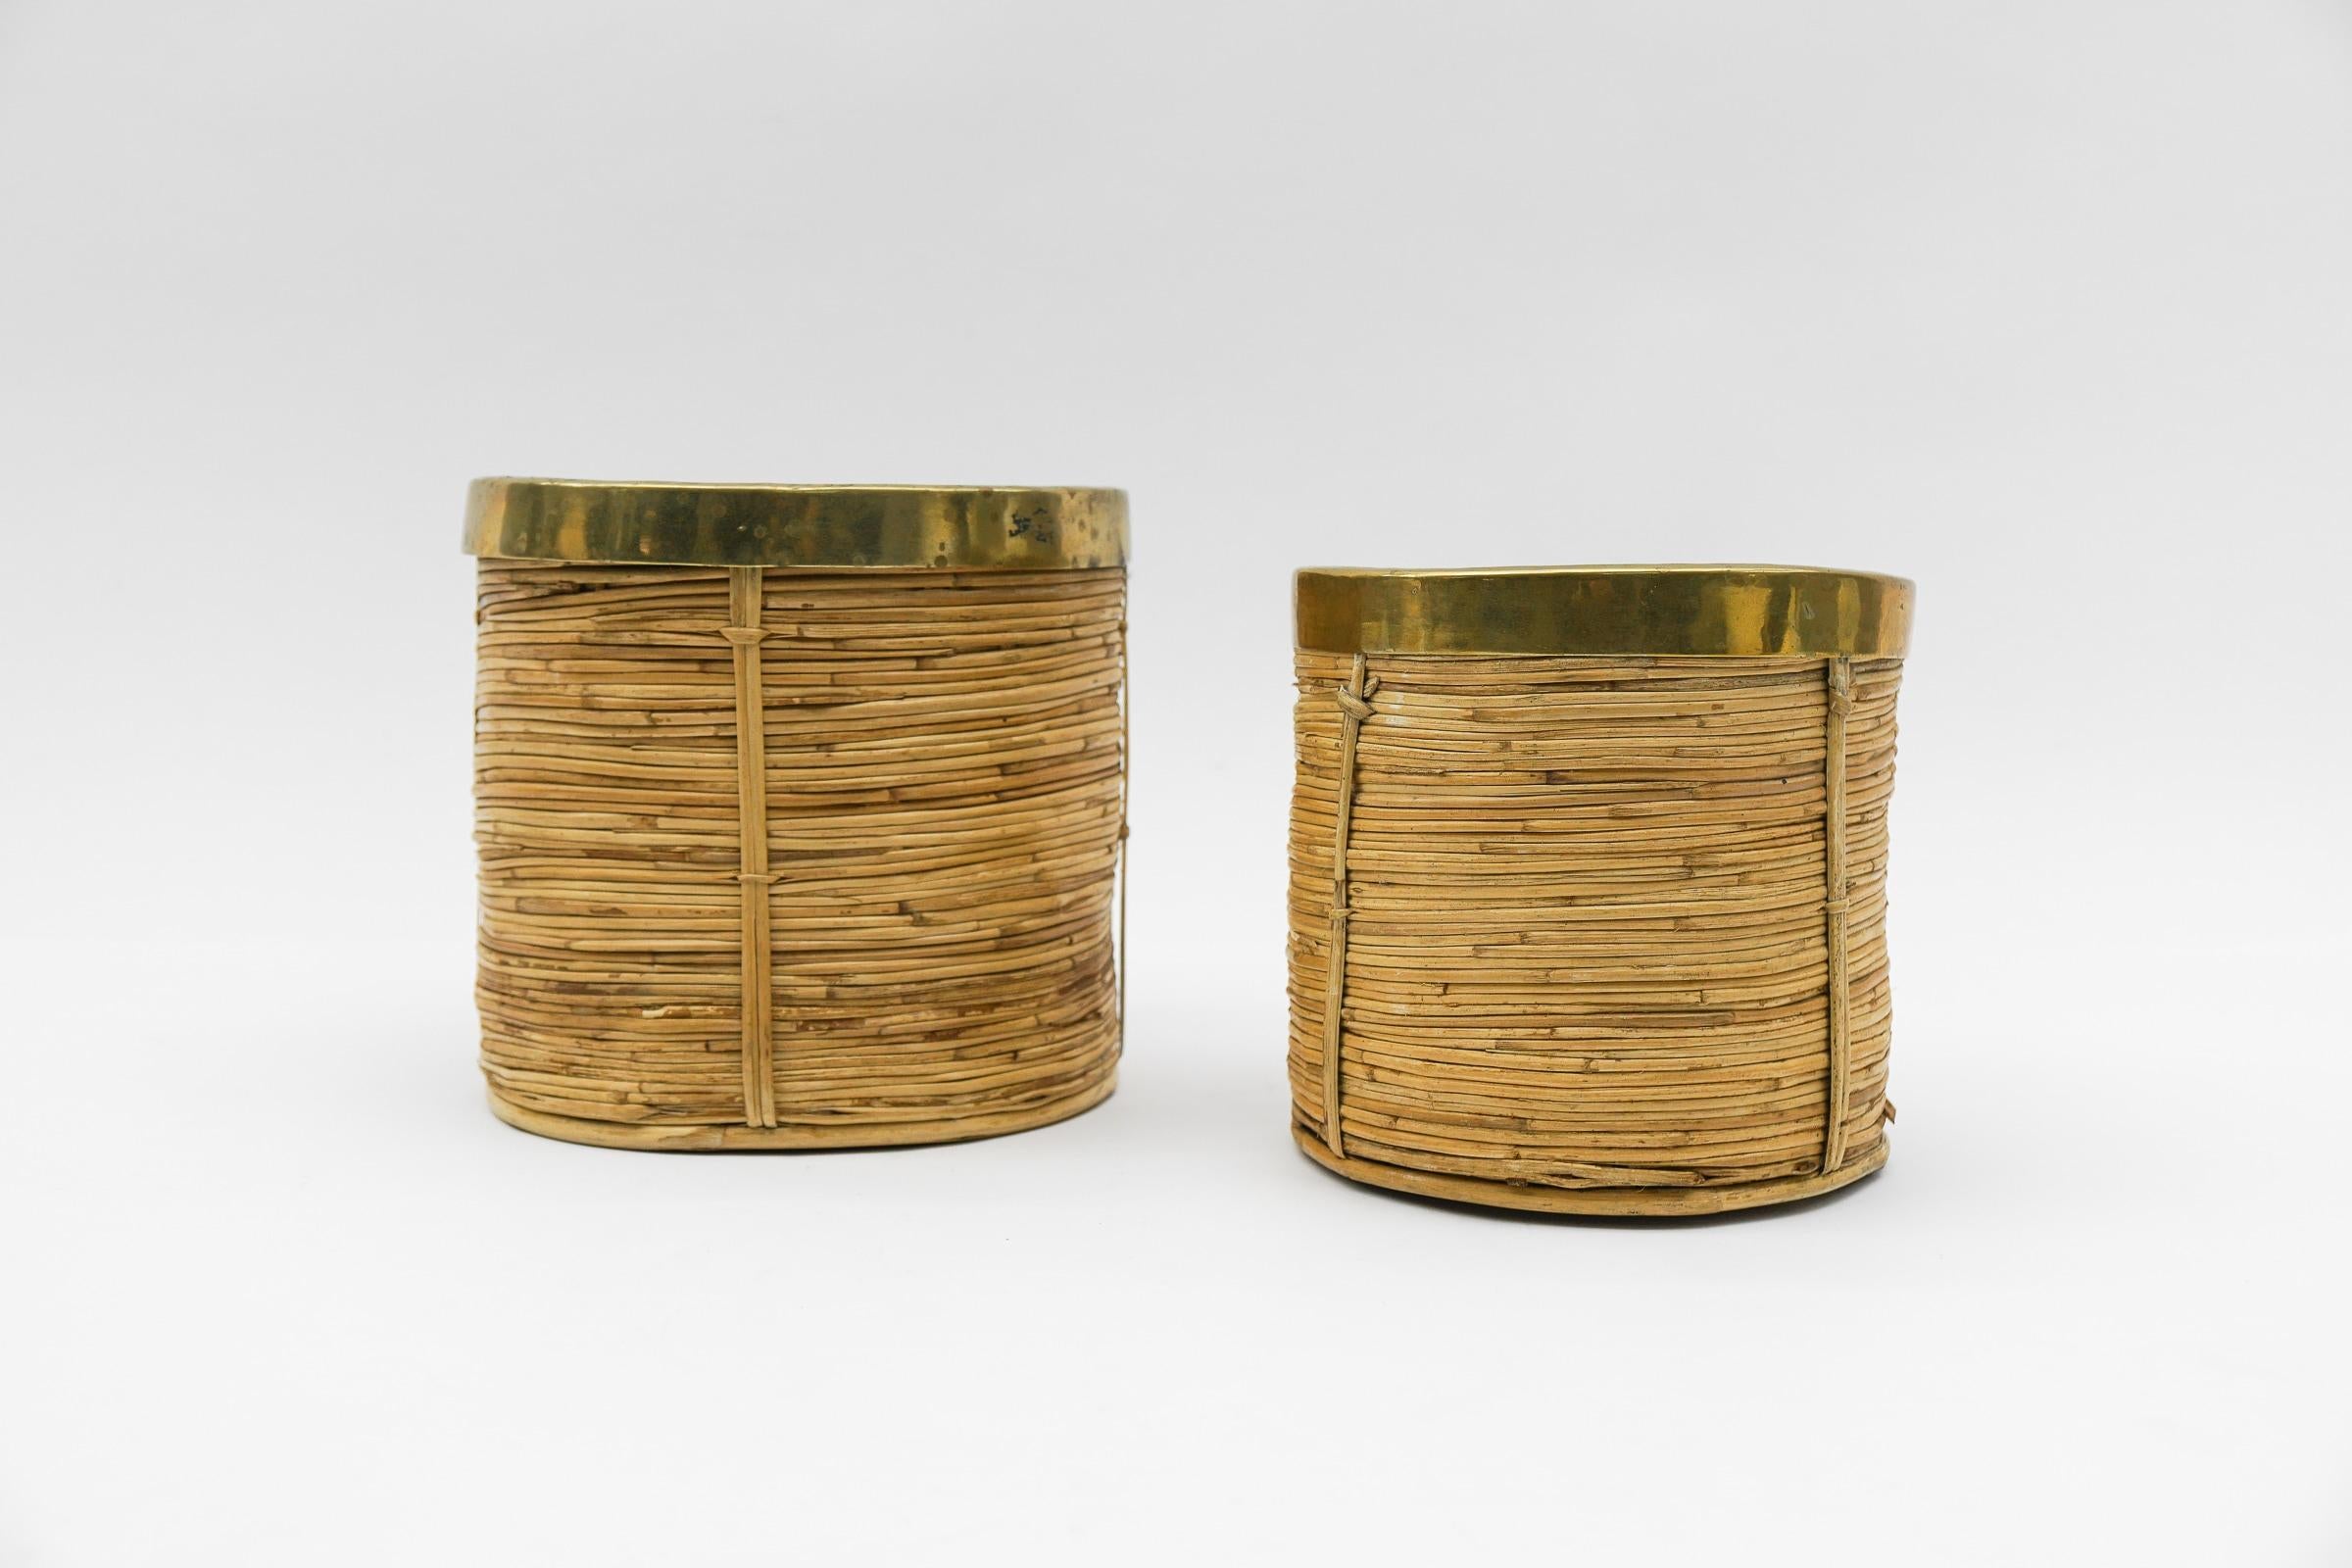 Austrian Set of Two Rattan and Brass Midcentury Handcrafted Planter, Austria, 1950s For Sale